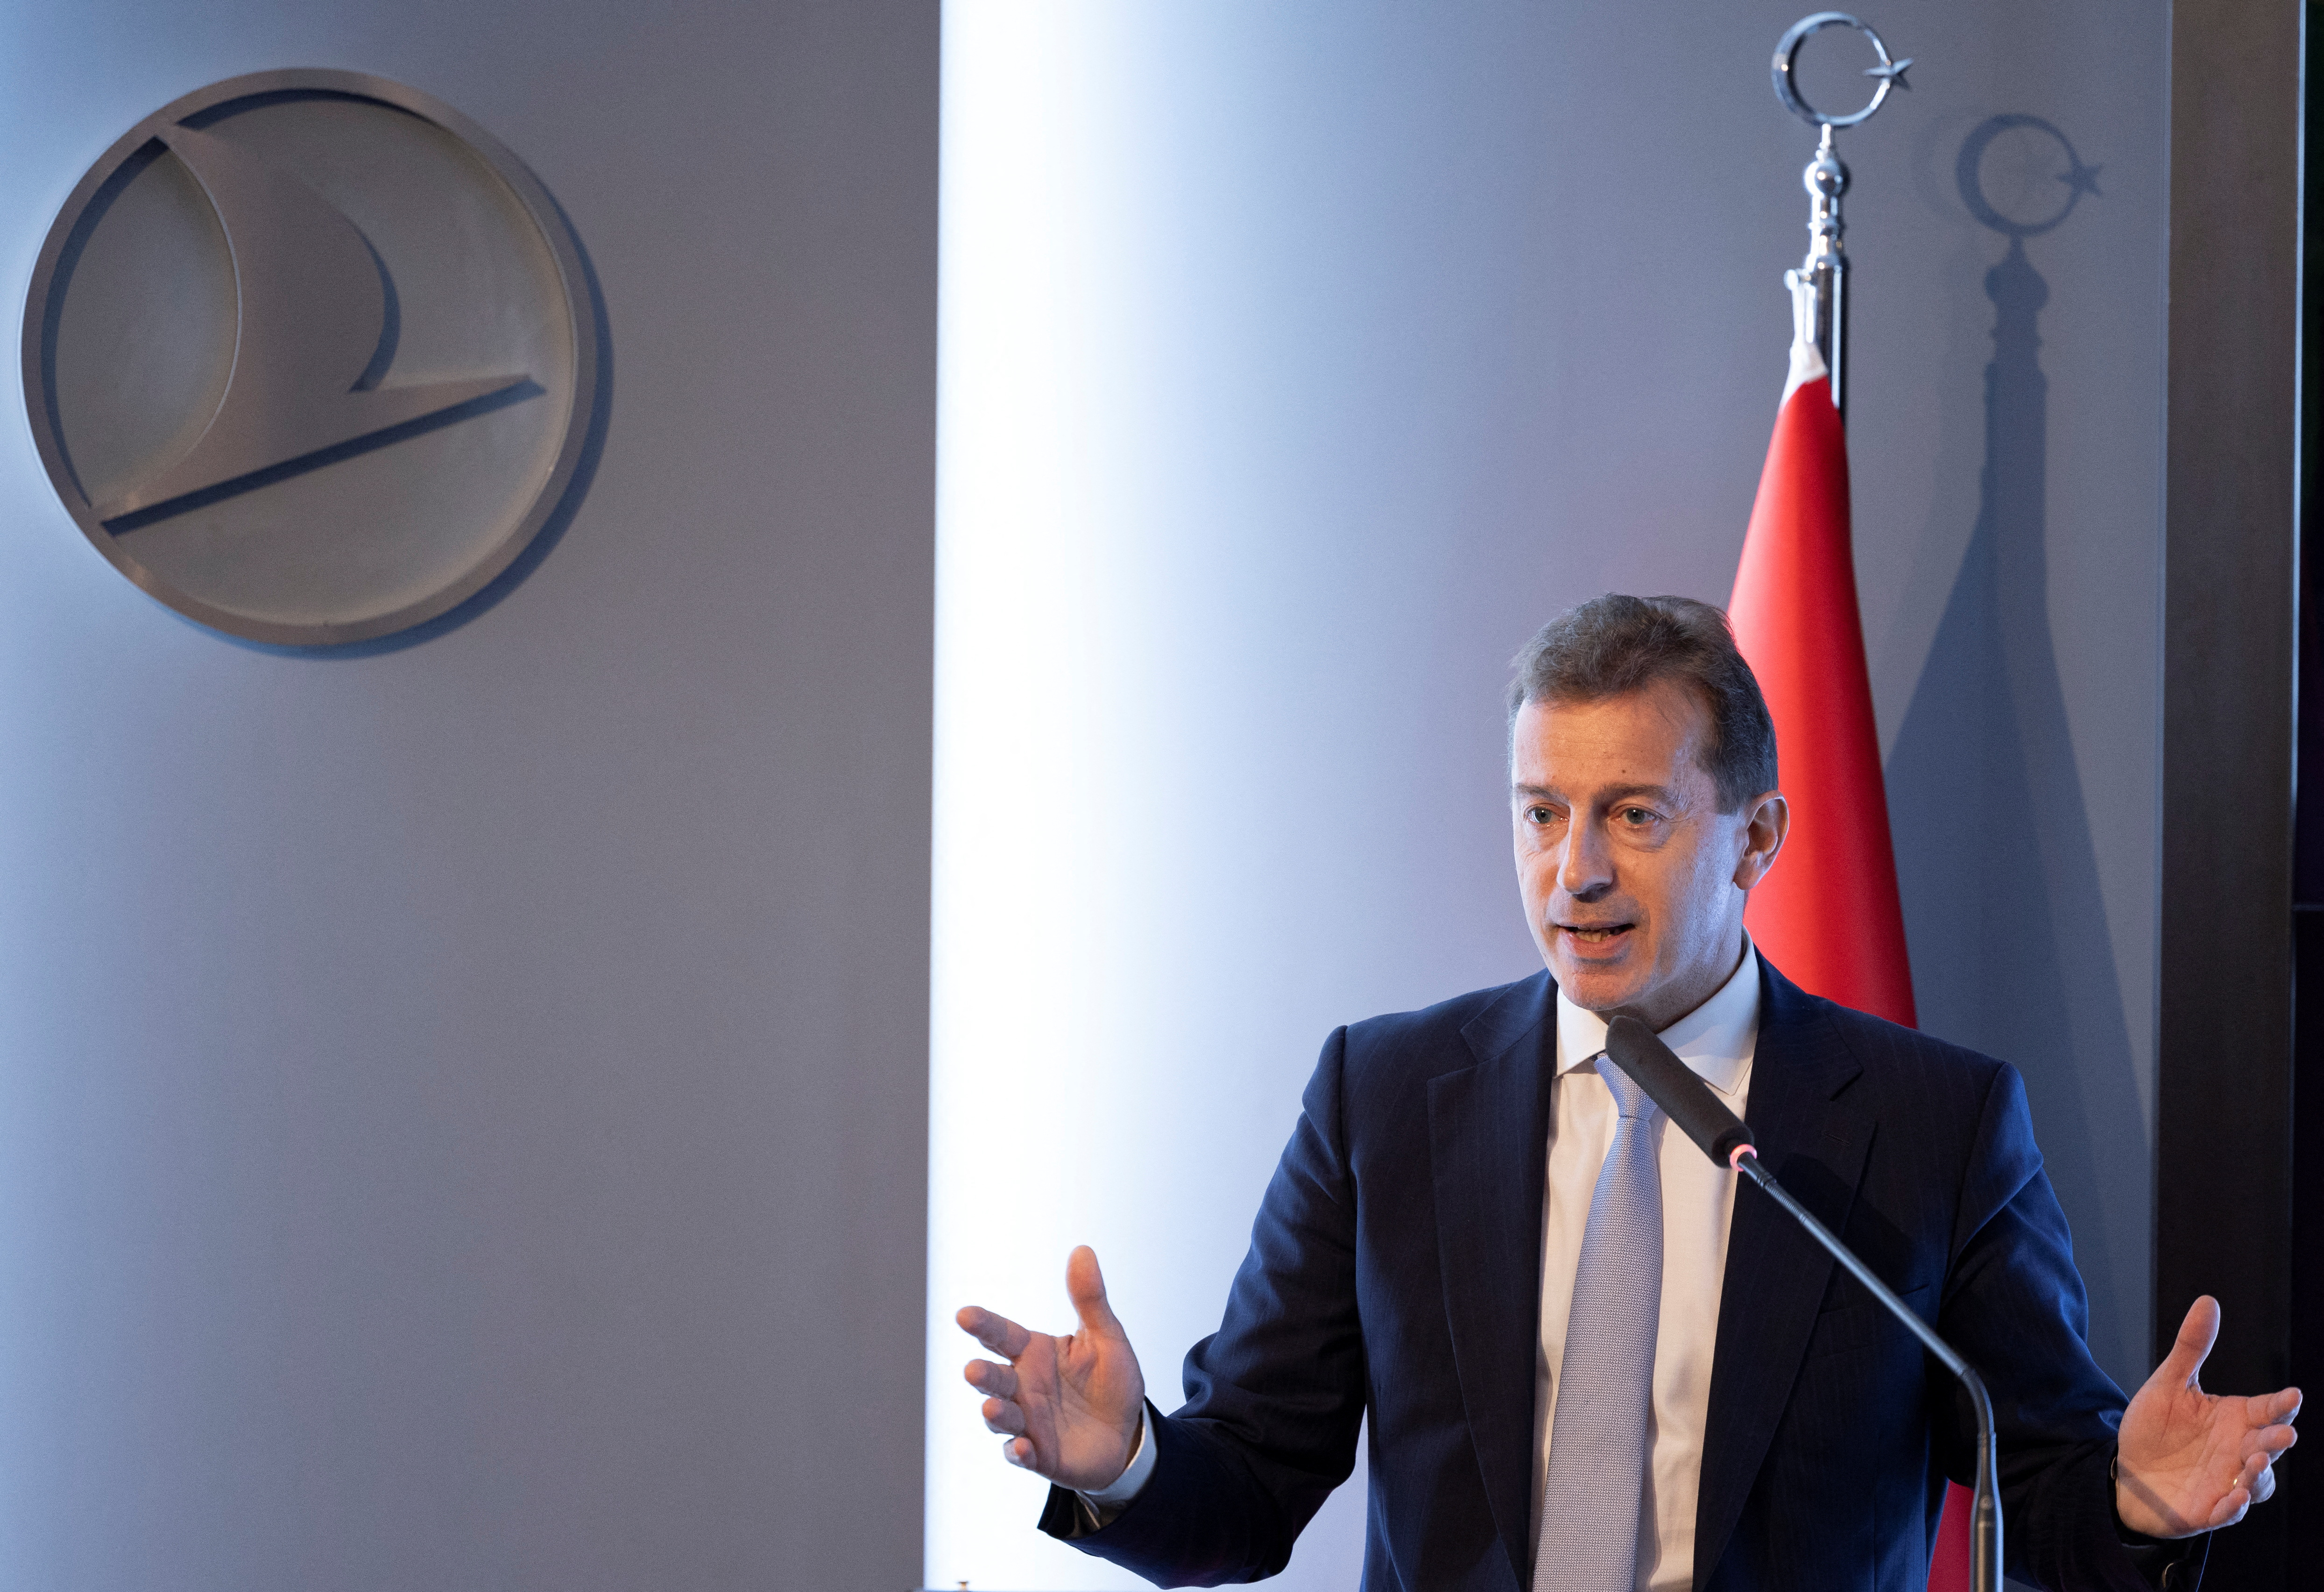 CEO of Airbus SE Guillaume Faury addresses the audience during a signing ceremony in Istanbul